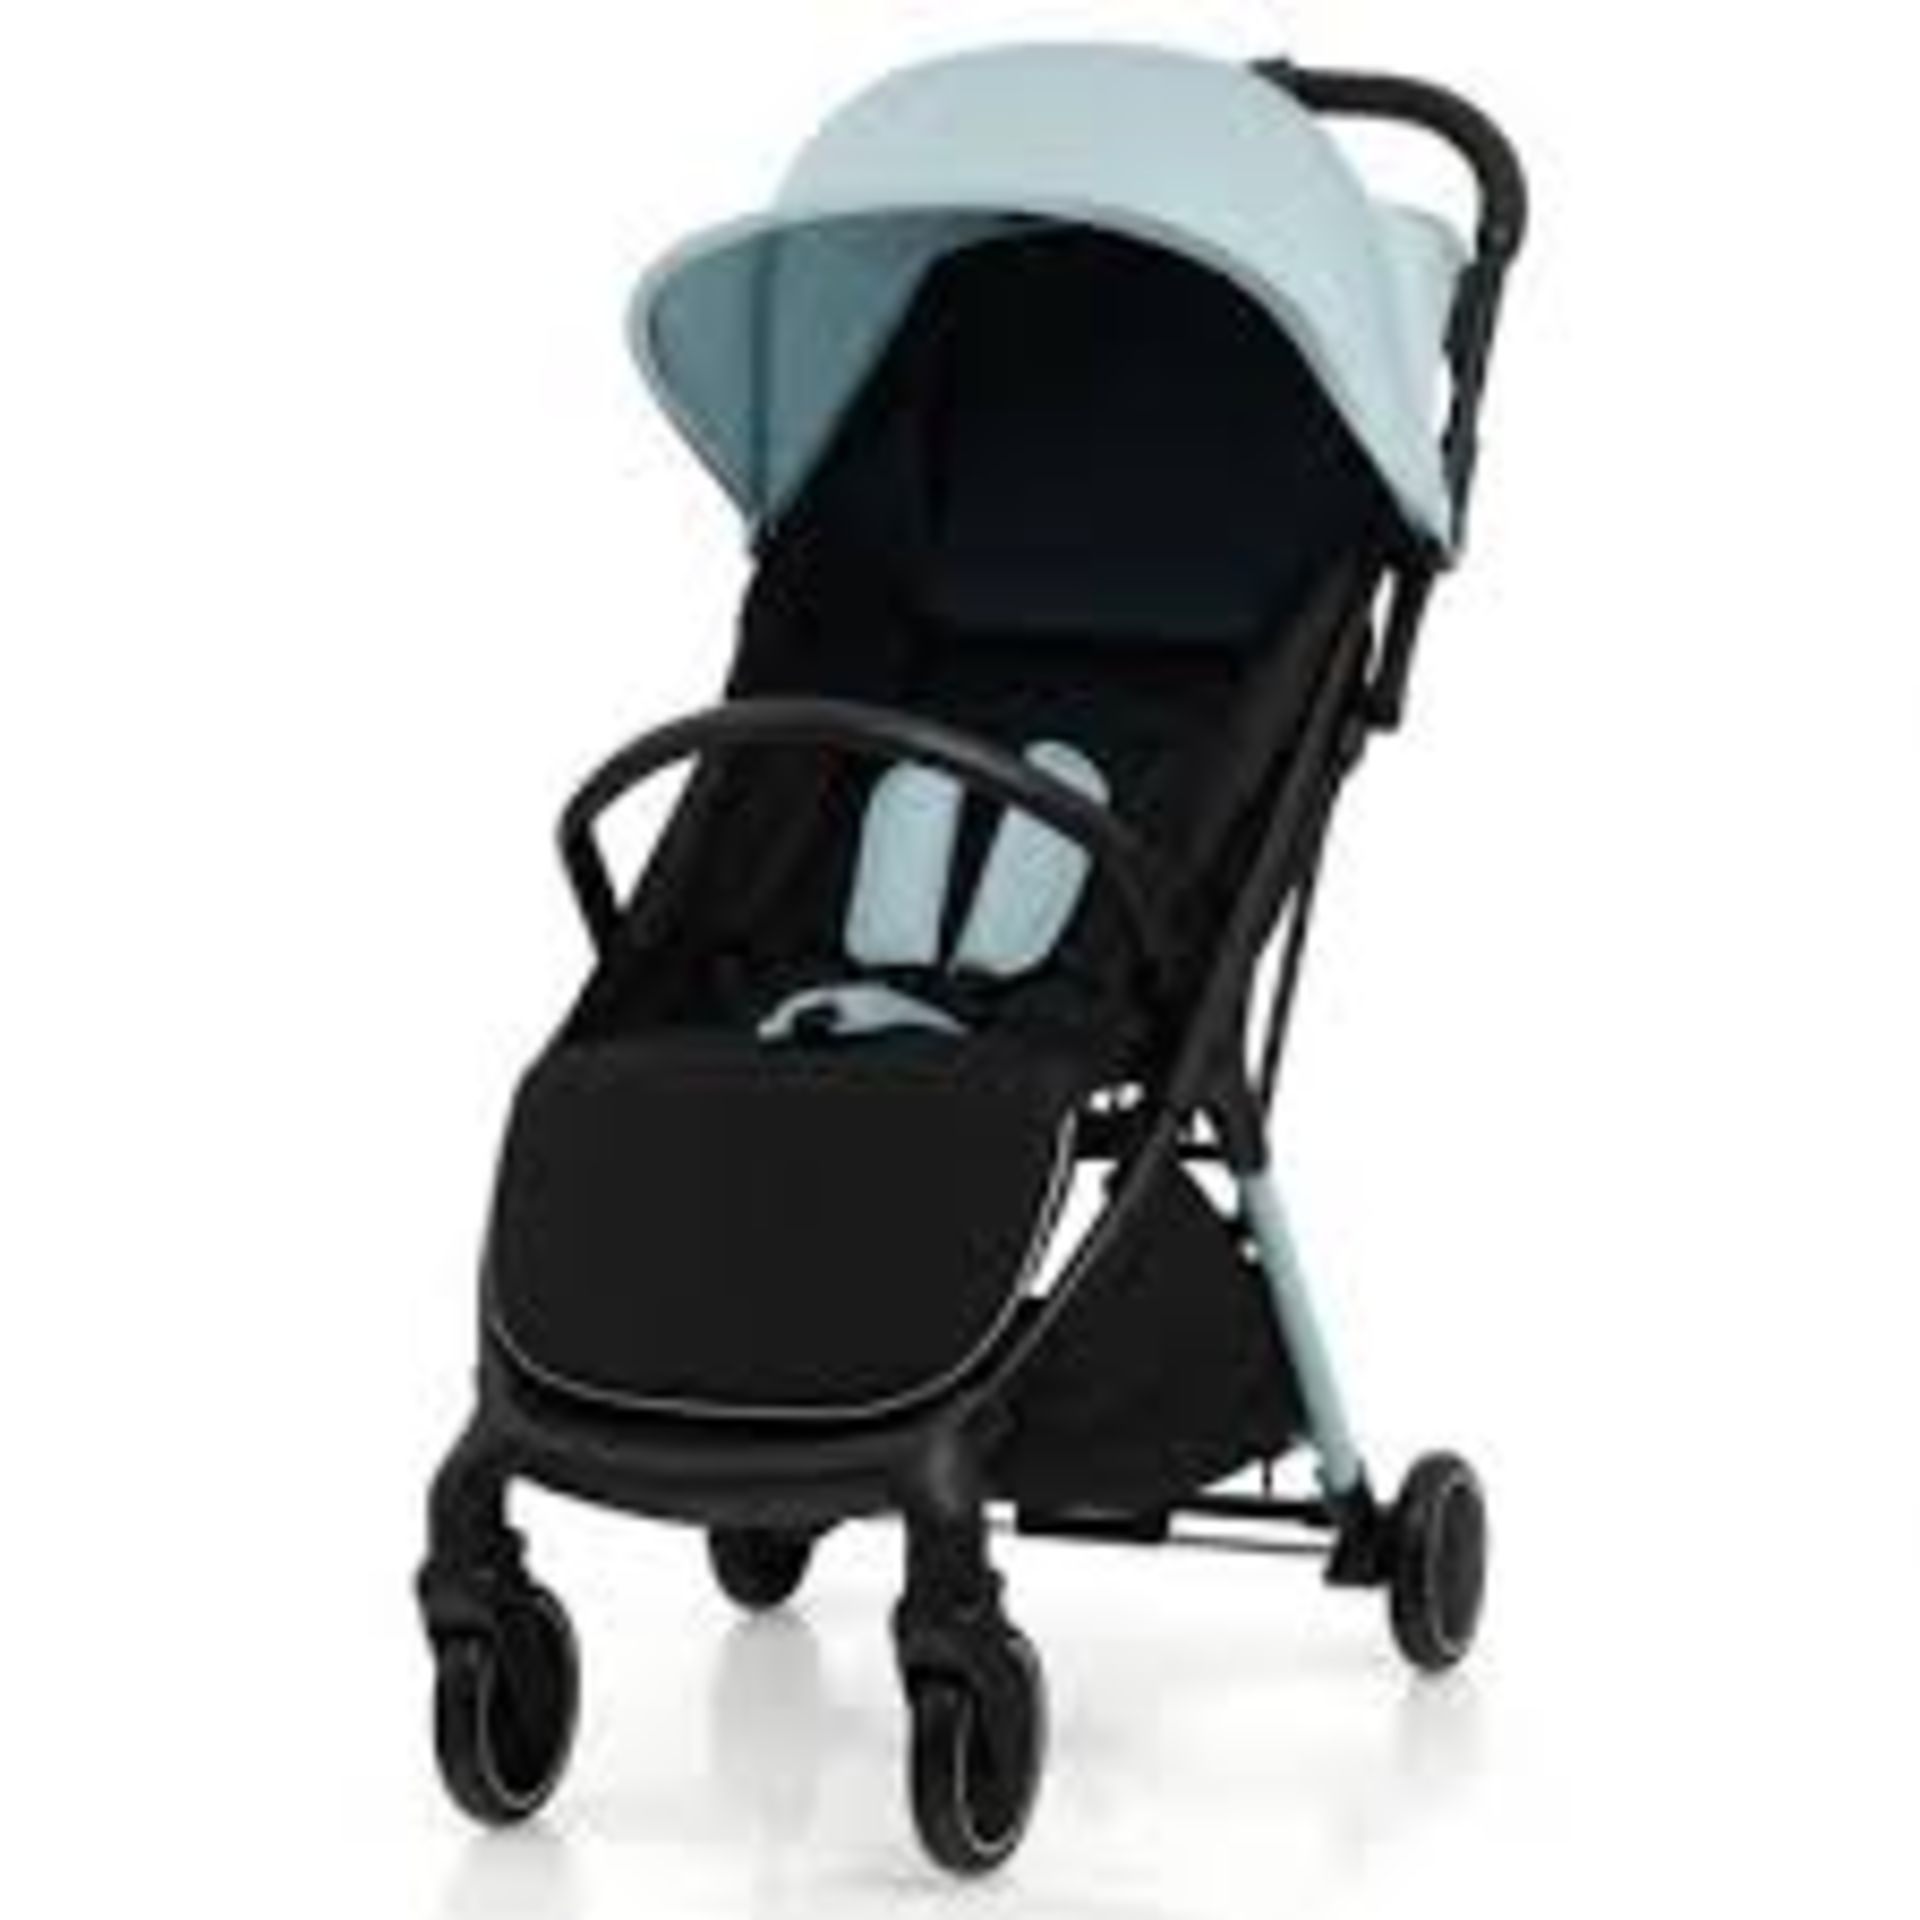 Lightweight Baby Stroller with Detachable Seat Cover. - R14.13.